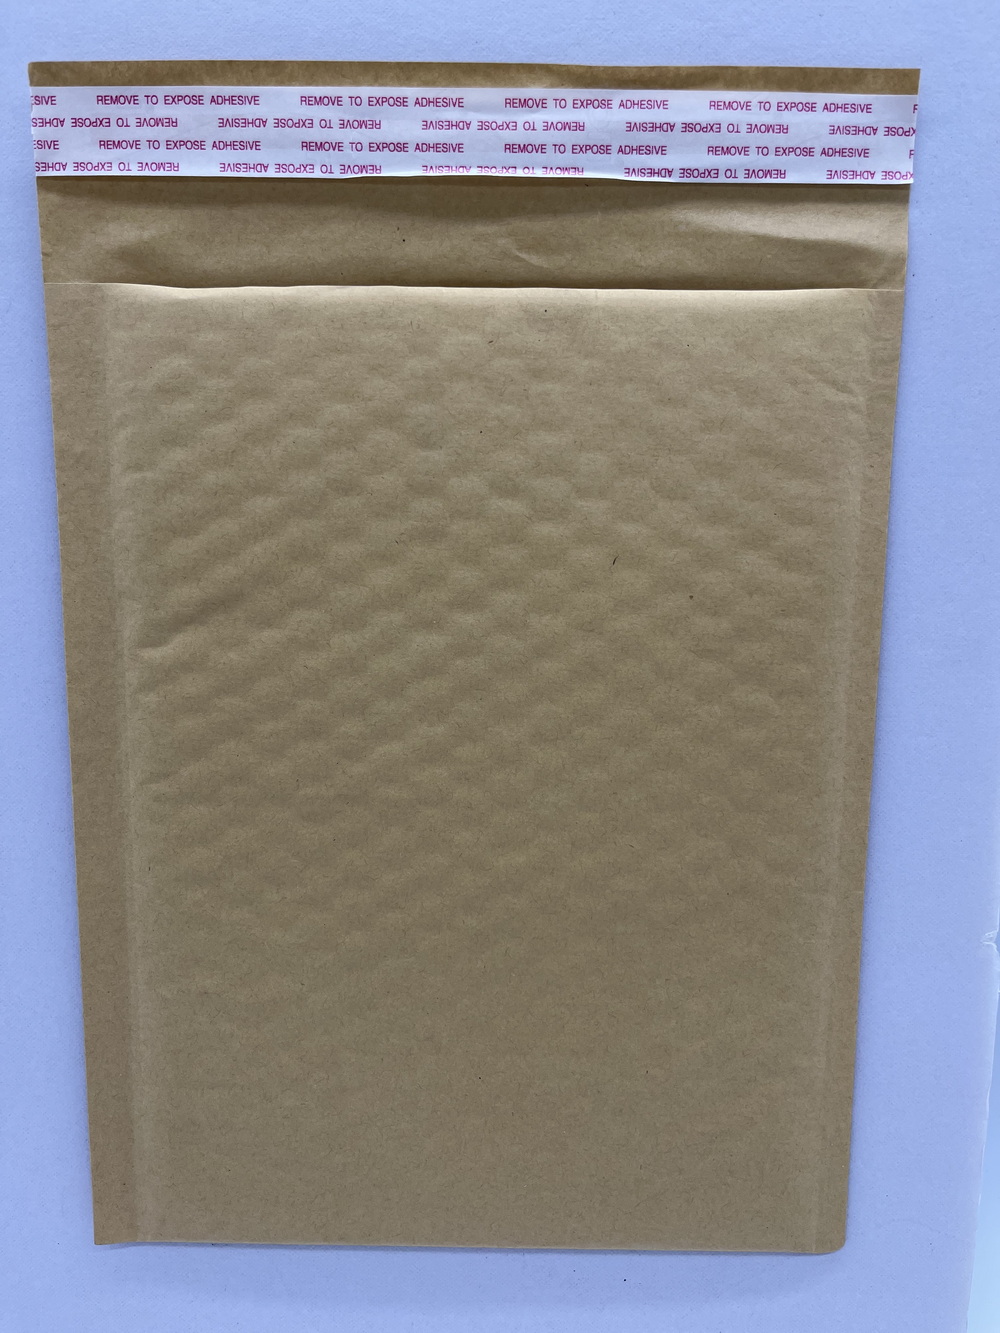 paper shipping bags with adhesive tape